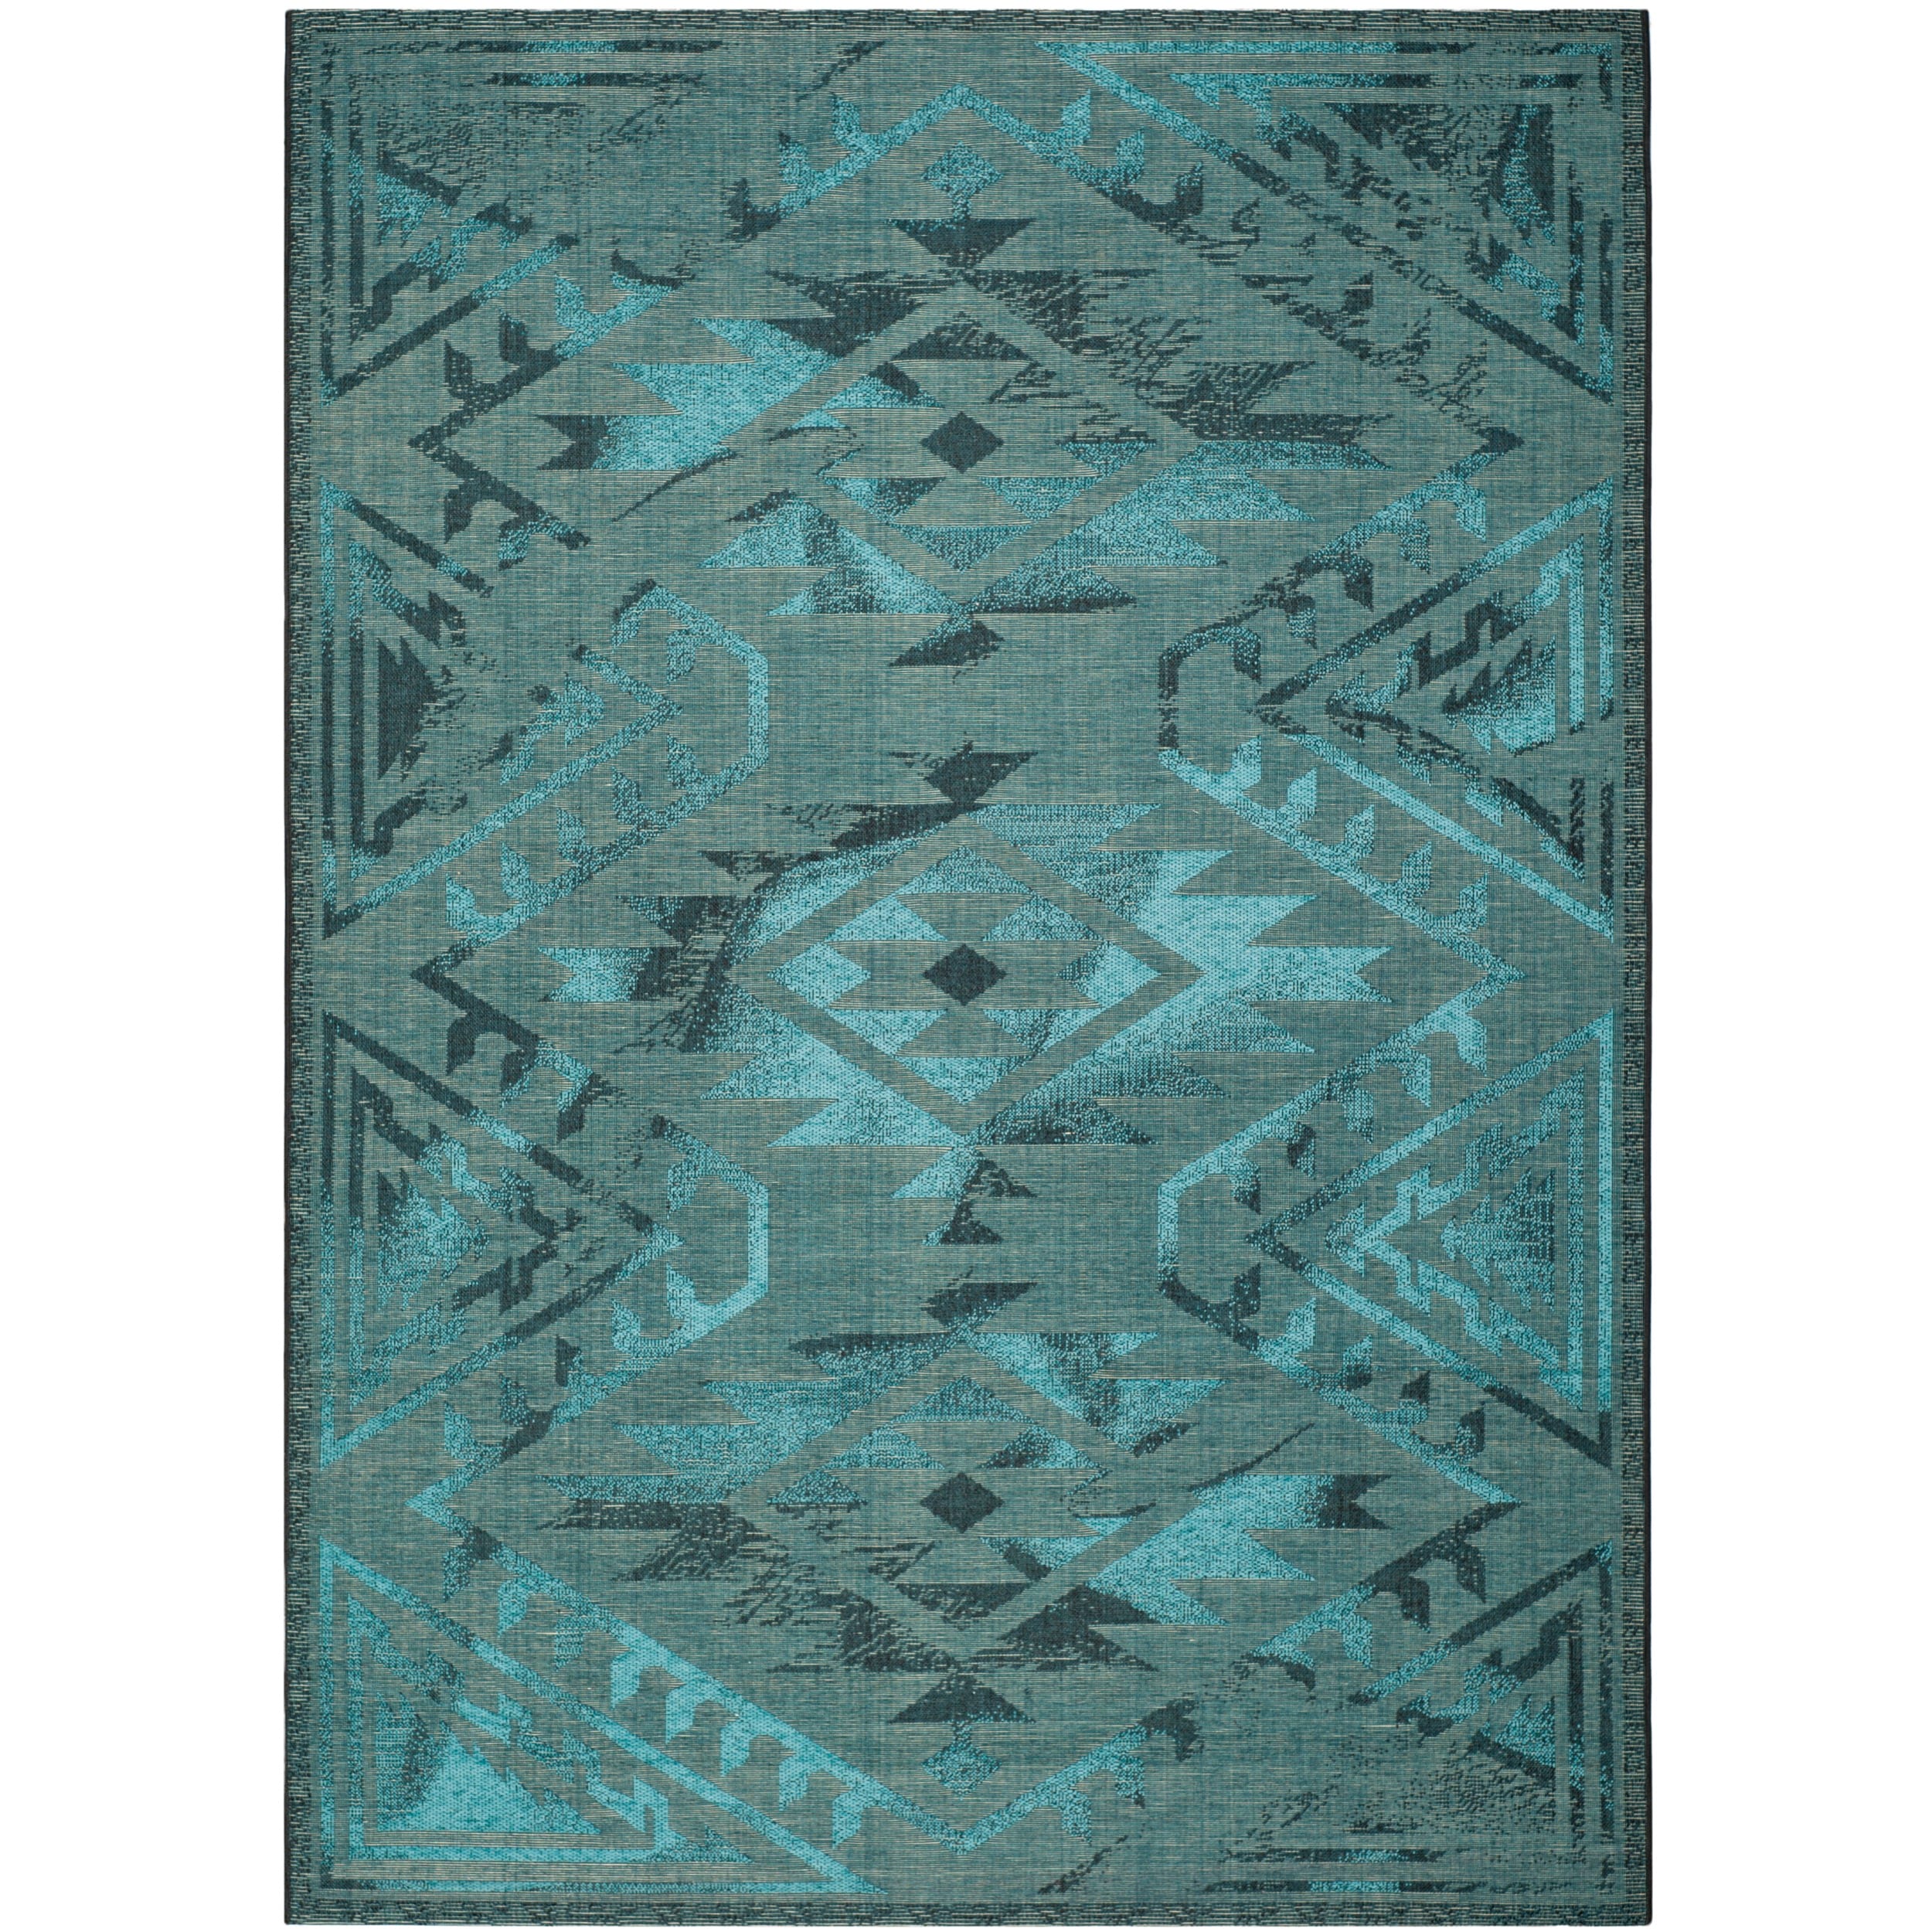 Safavieh Palazzo Black/ Turquoise Polypropylene/ Over dyed Chenille Oriental Rug (8 X 11)